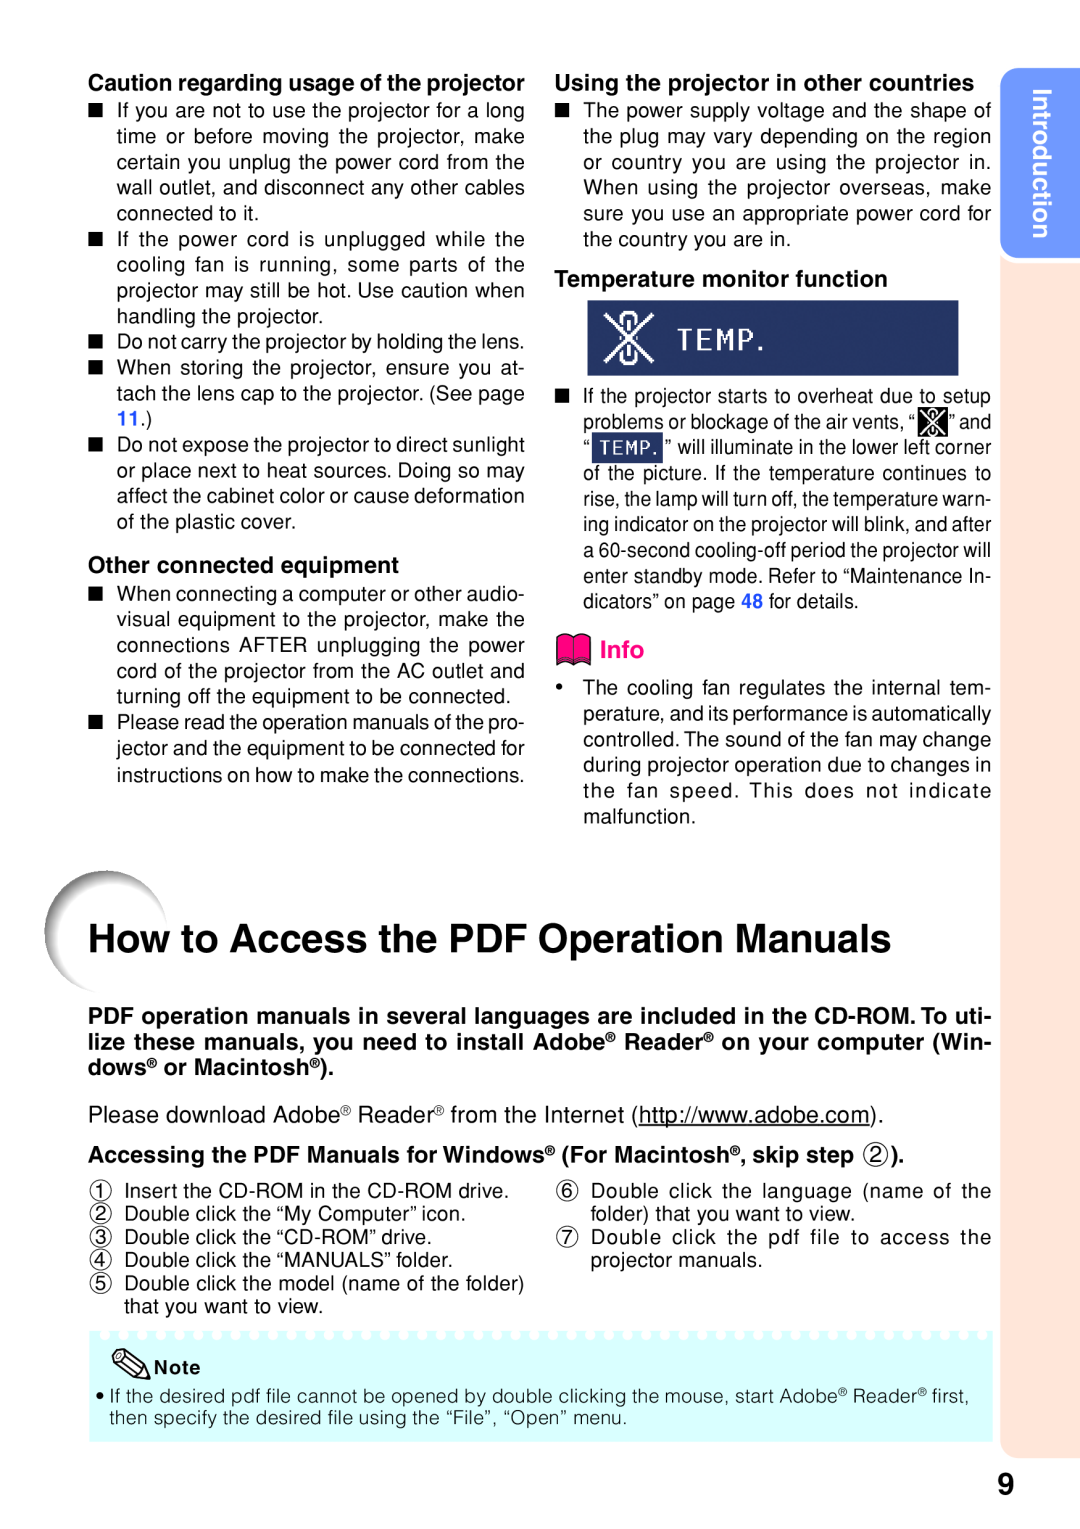 Sharp XR-40X, XR-30X How to Access the PDF Operation Manuals, Info, Introduction, Caution regarding usage of the projector 